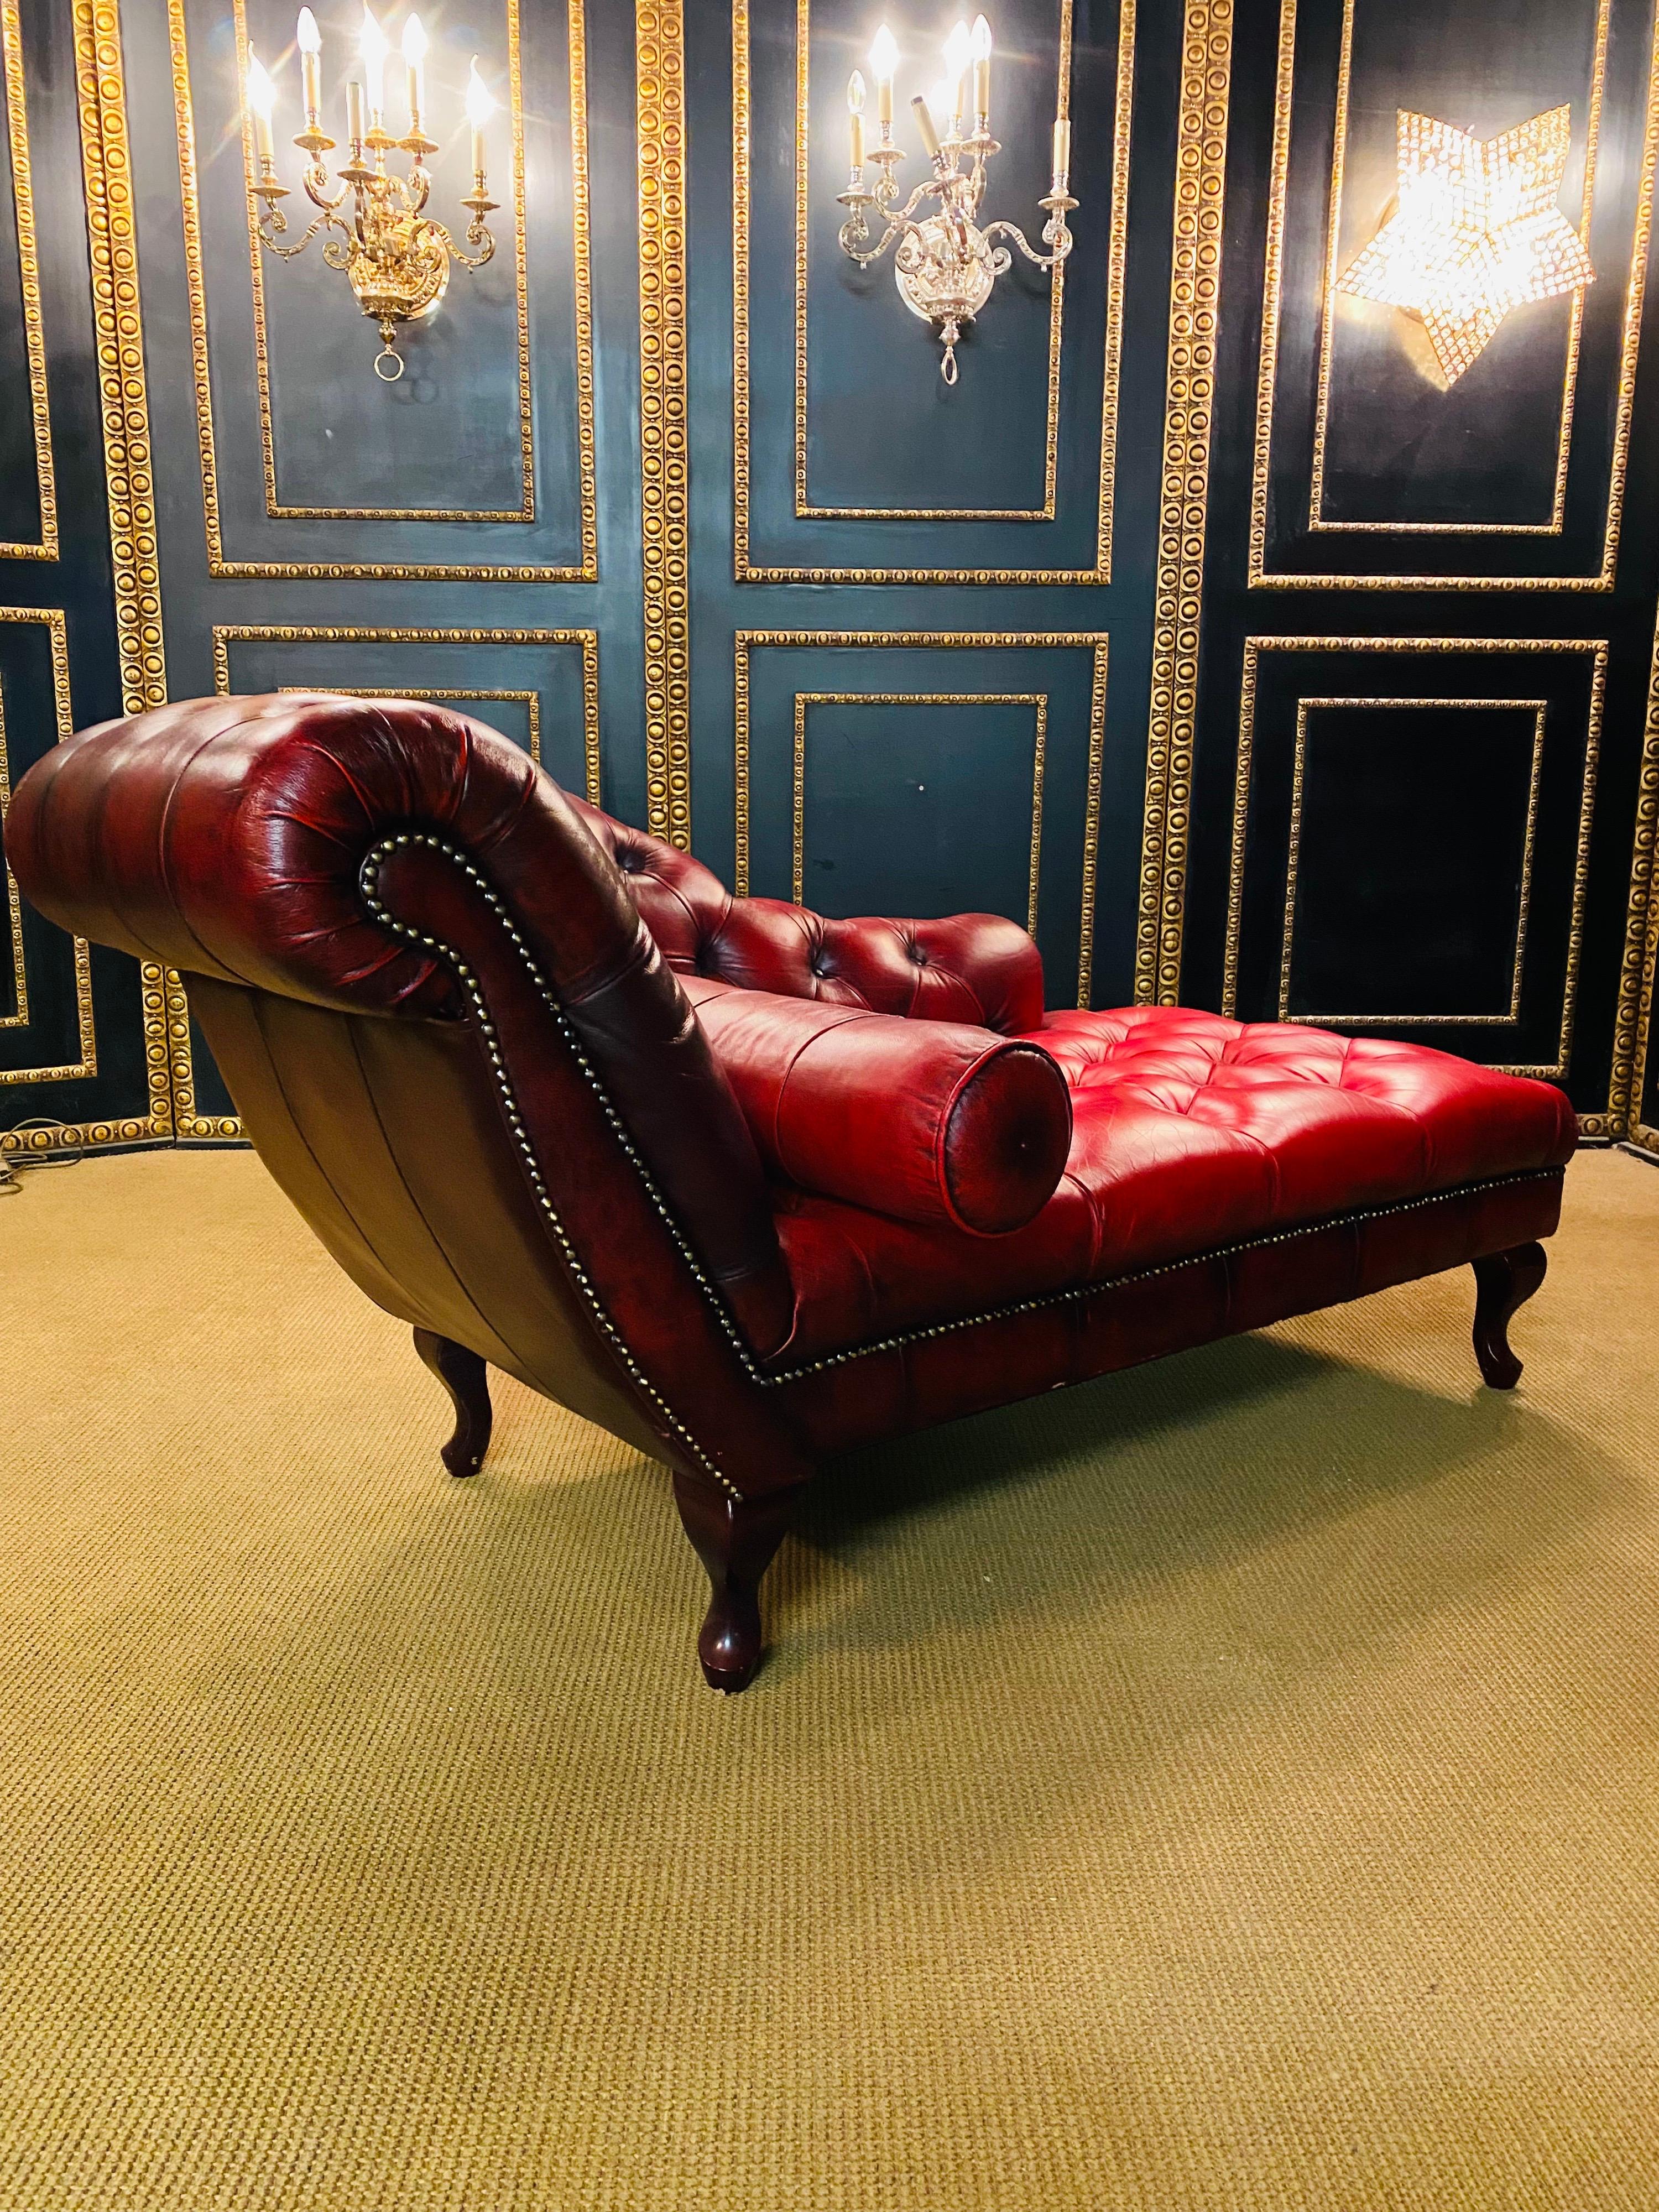 Lovely original vintage Chesterfield Red Leather Chaise Lounge Daybed Sofa For Sale 2